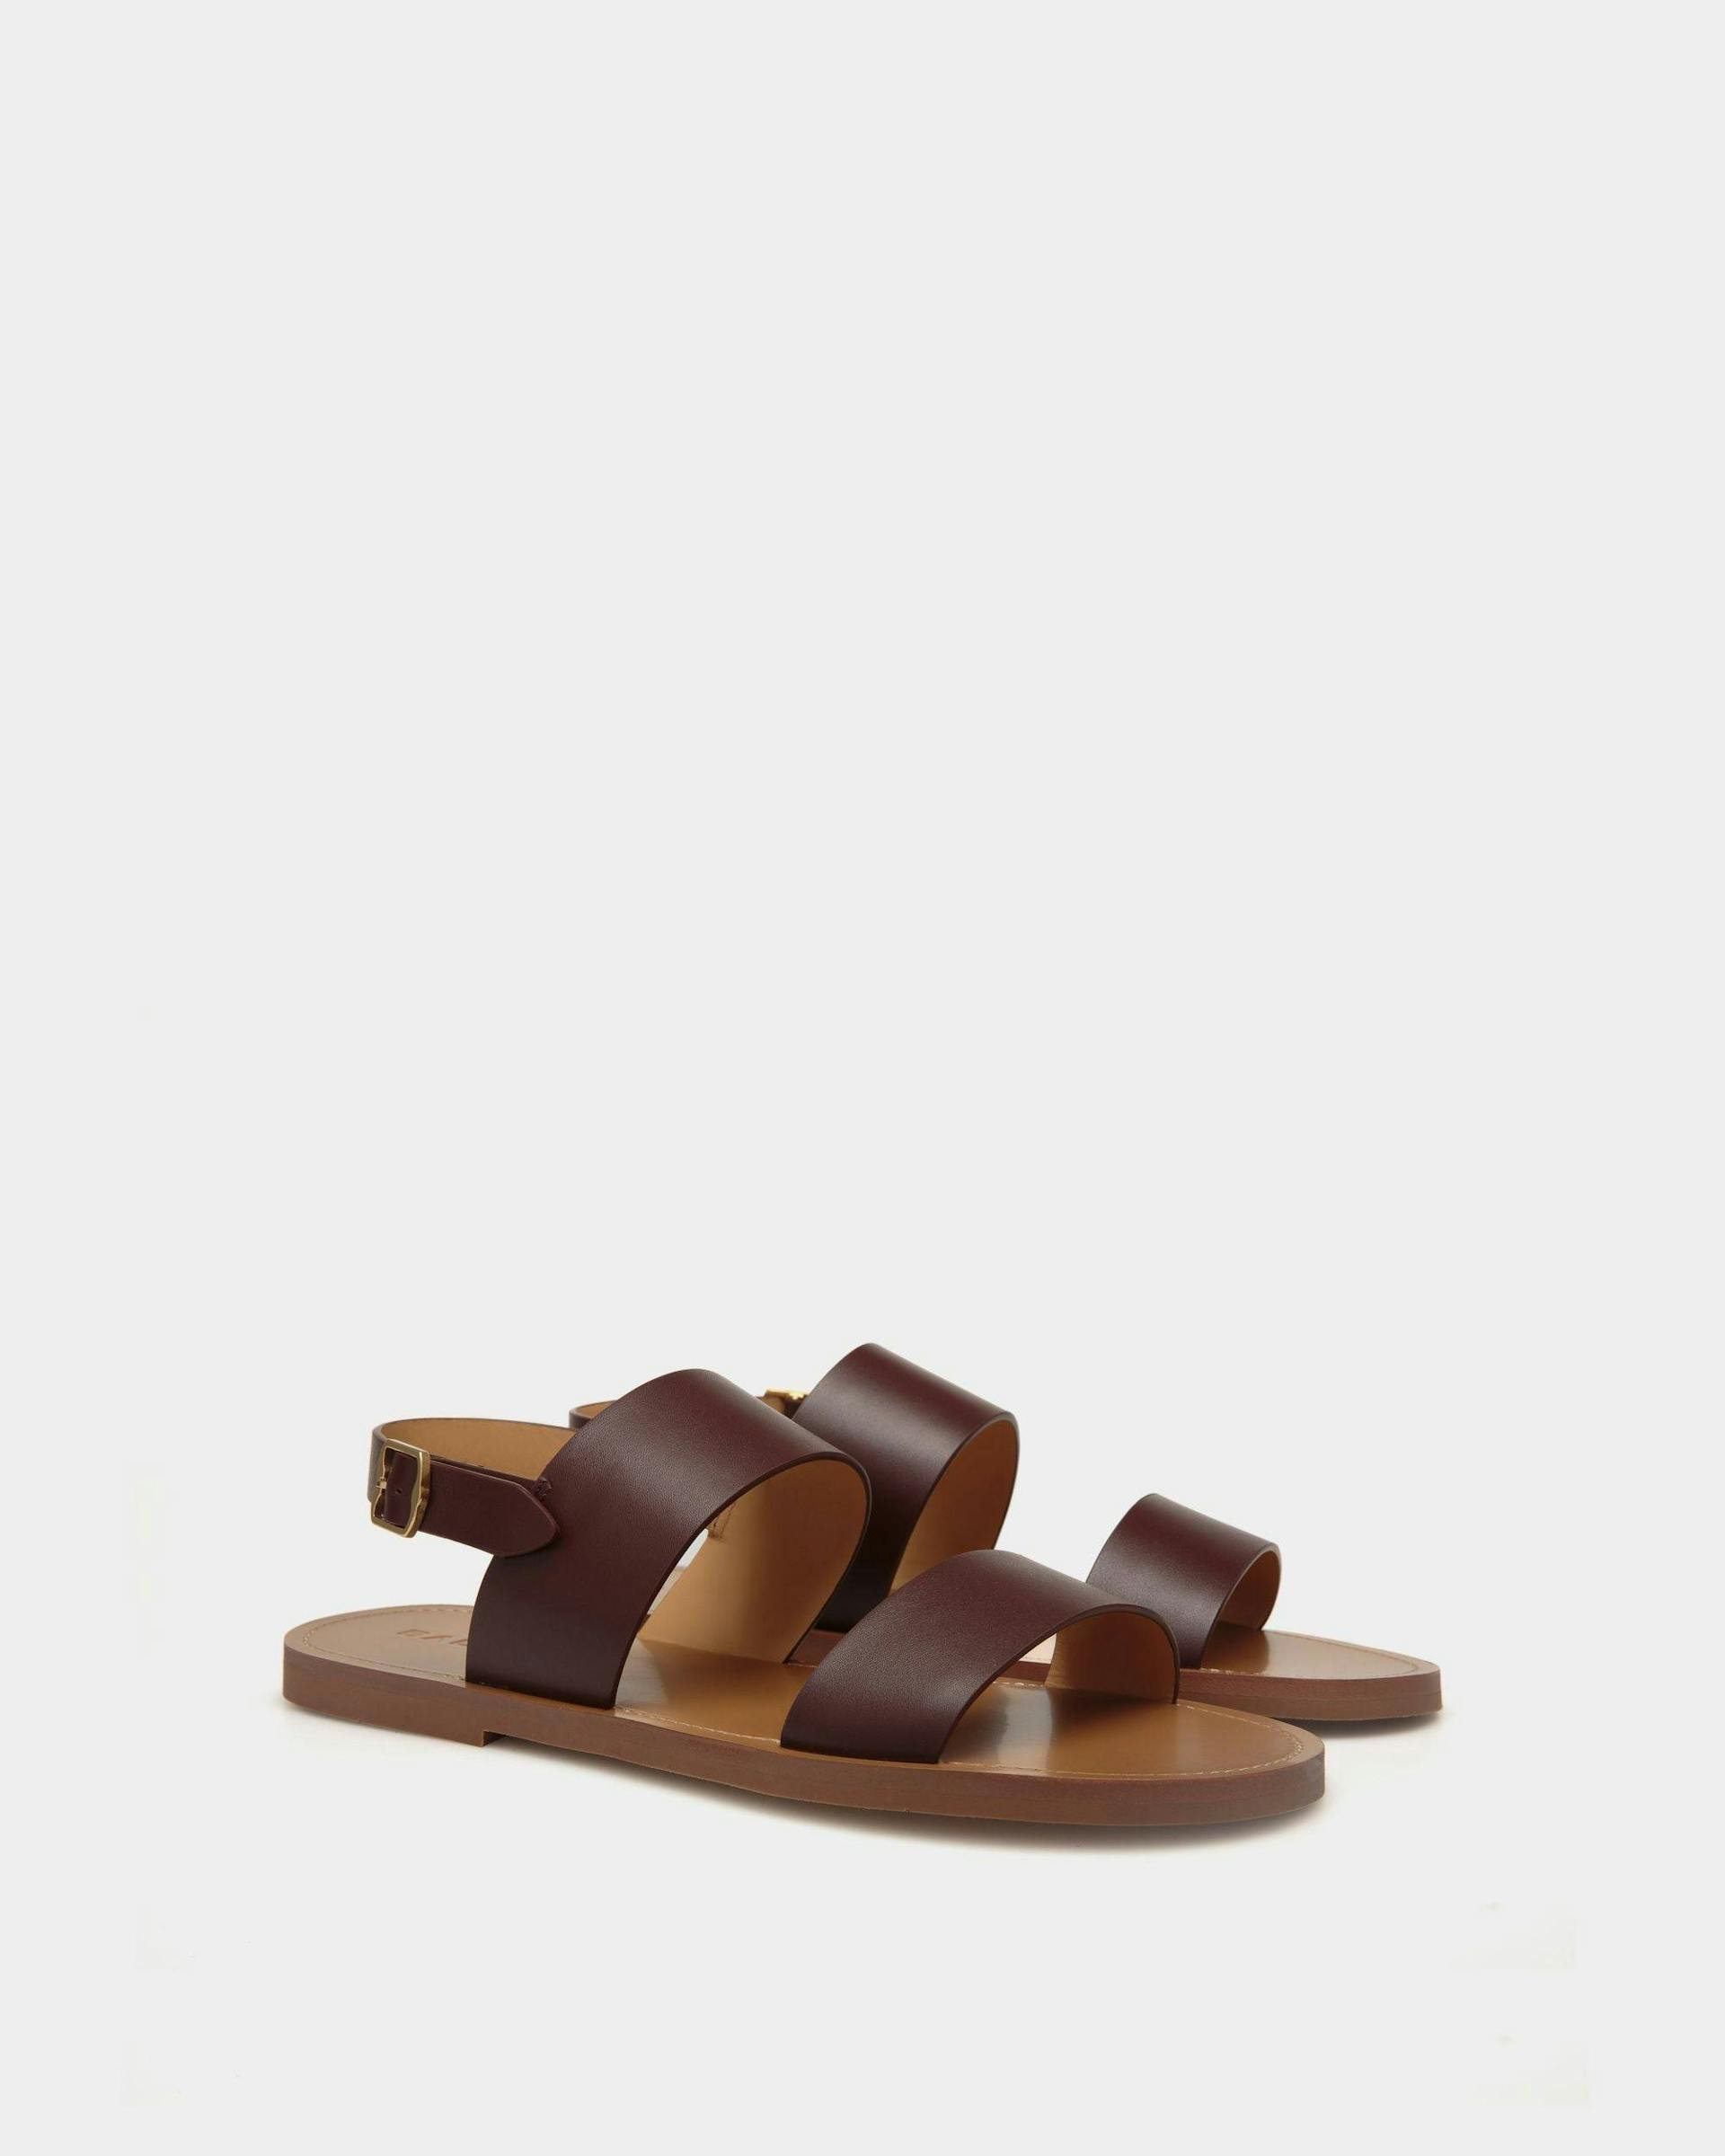 Men's Chateau Sandal in Chestnut Brown Leather | Bally | Still Life 3/4 Front